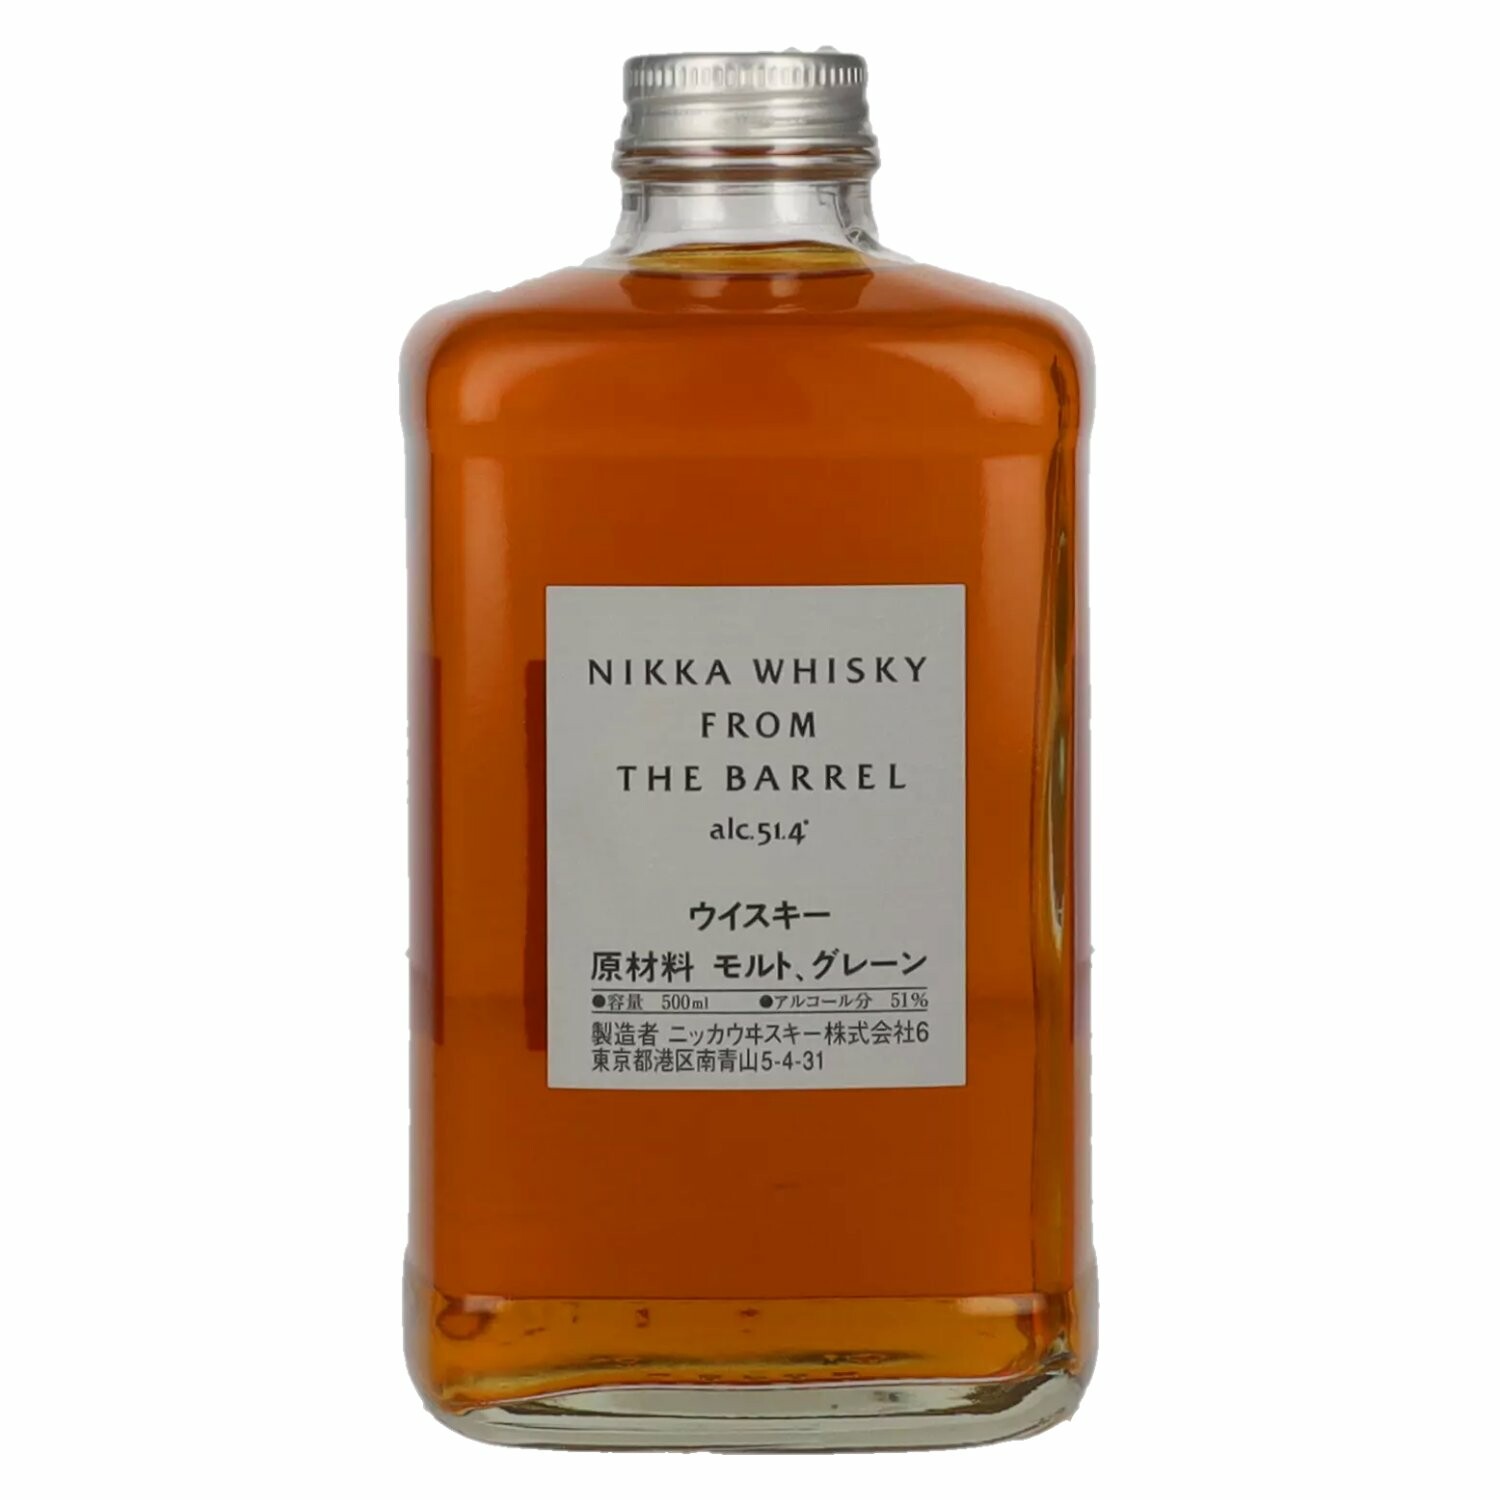 Nikka From the Barrel Double Matured Blended Whisky 51,4% Vol. 0,5l